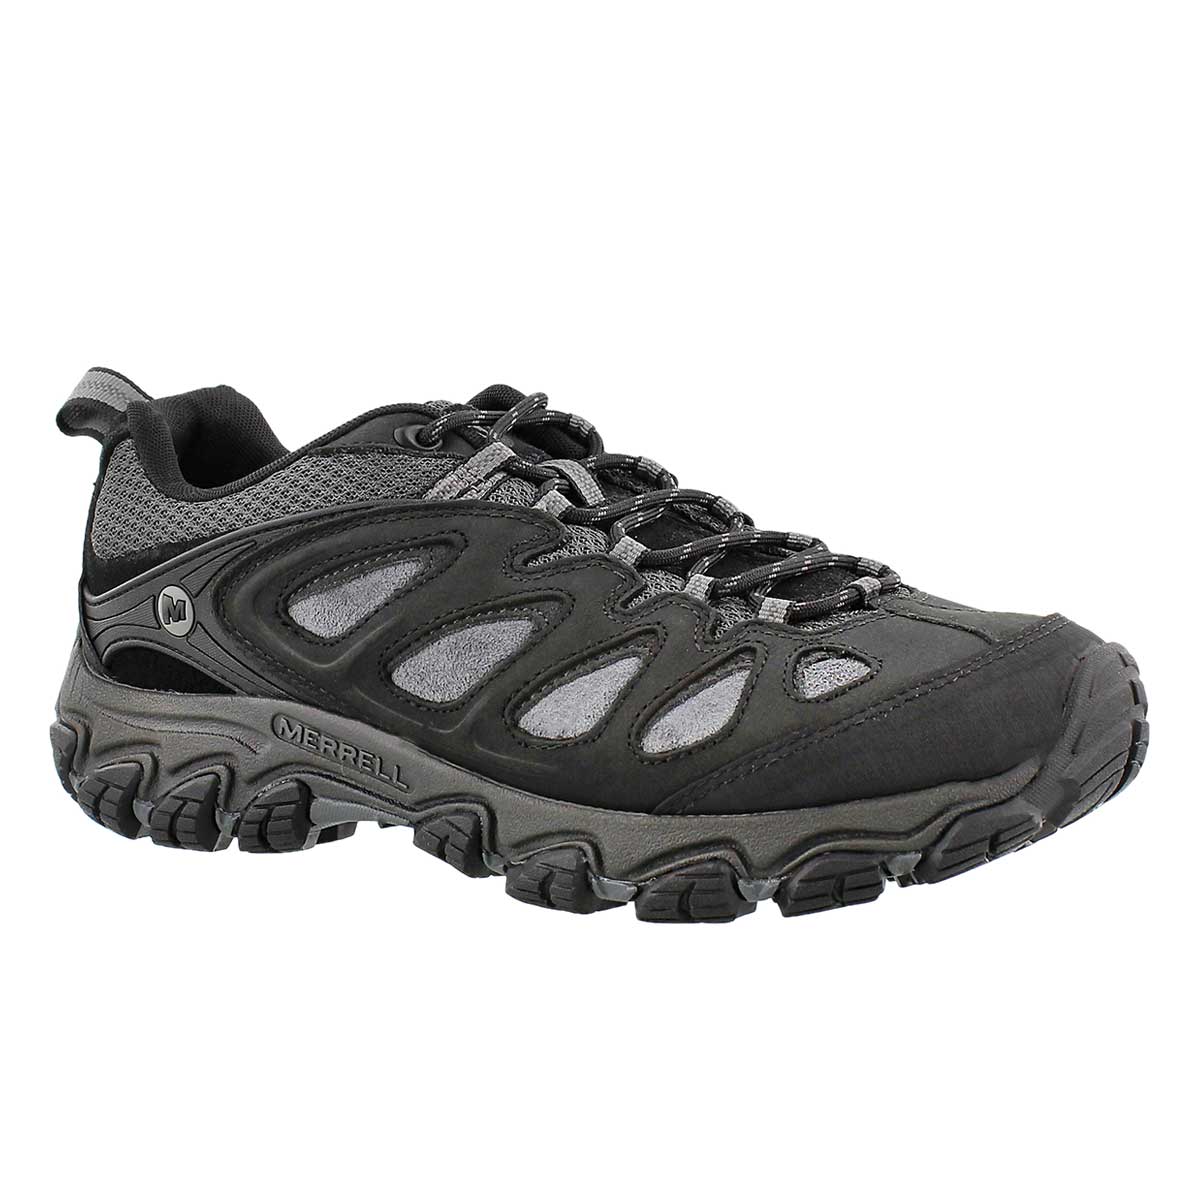 Merrell Men's Pulsate Lace Up Hiking Shoe